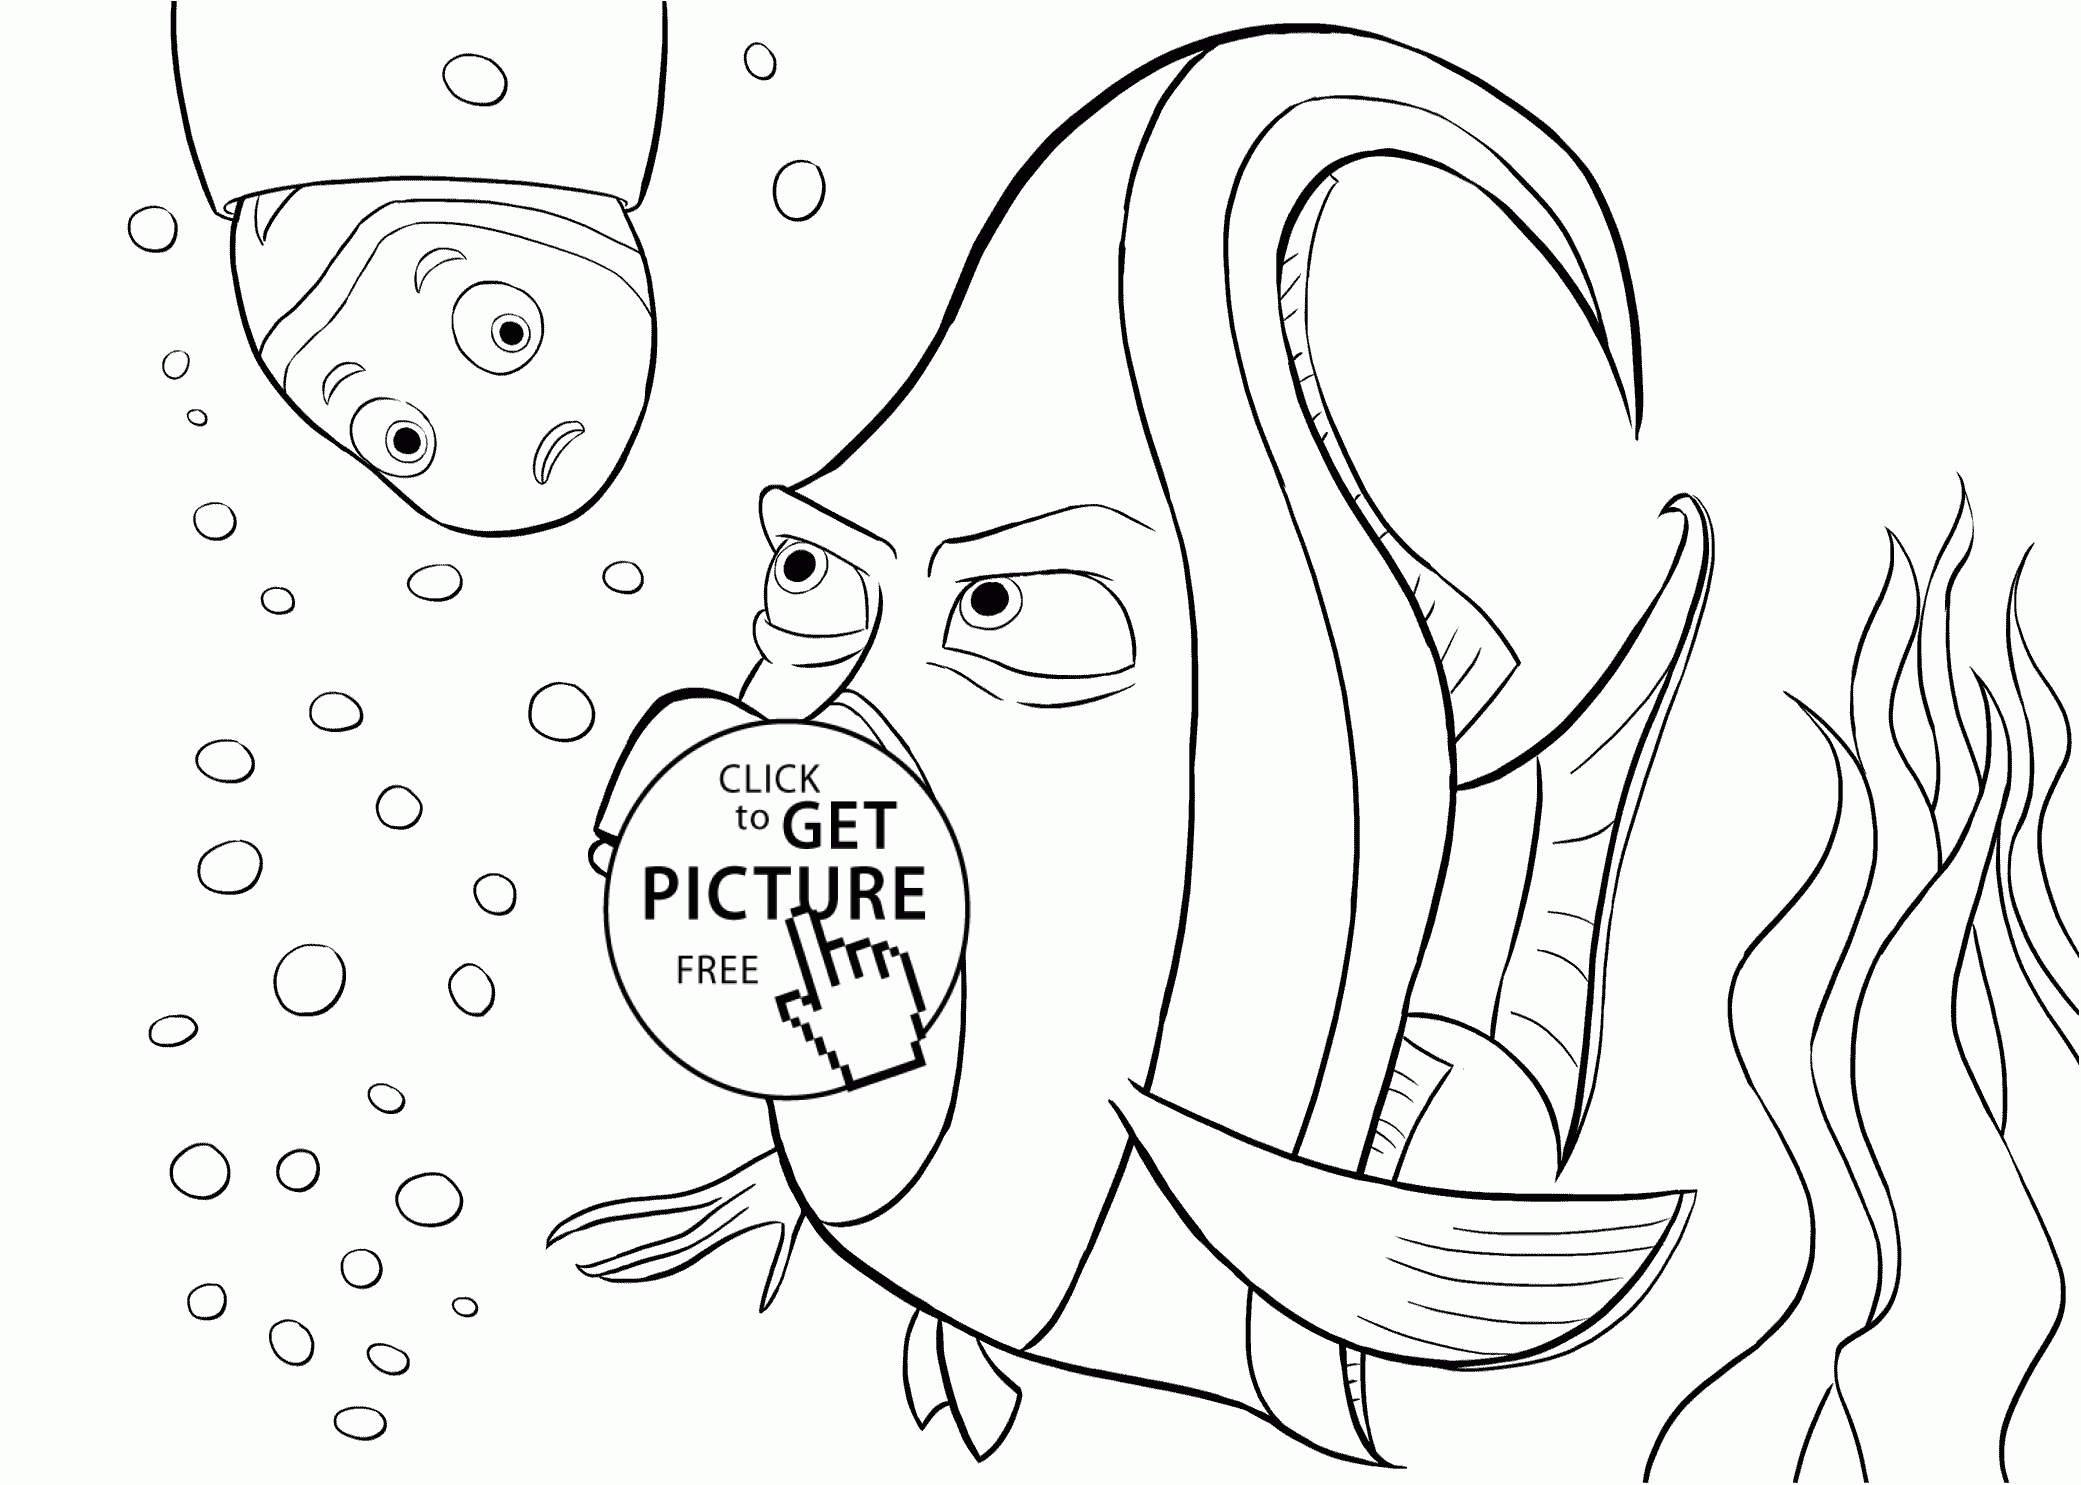 incredible Finding Nemo coloring pages for kids printable free – aquarium coloring pages printable